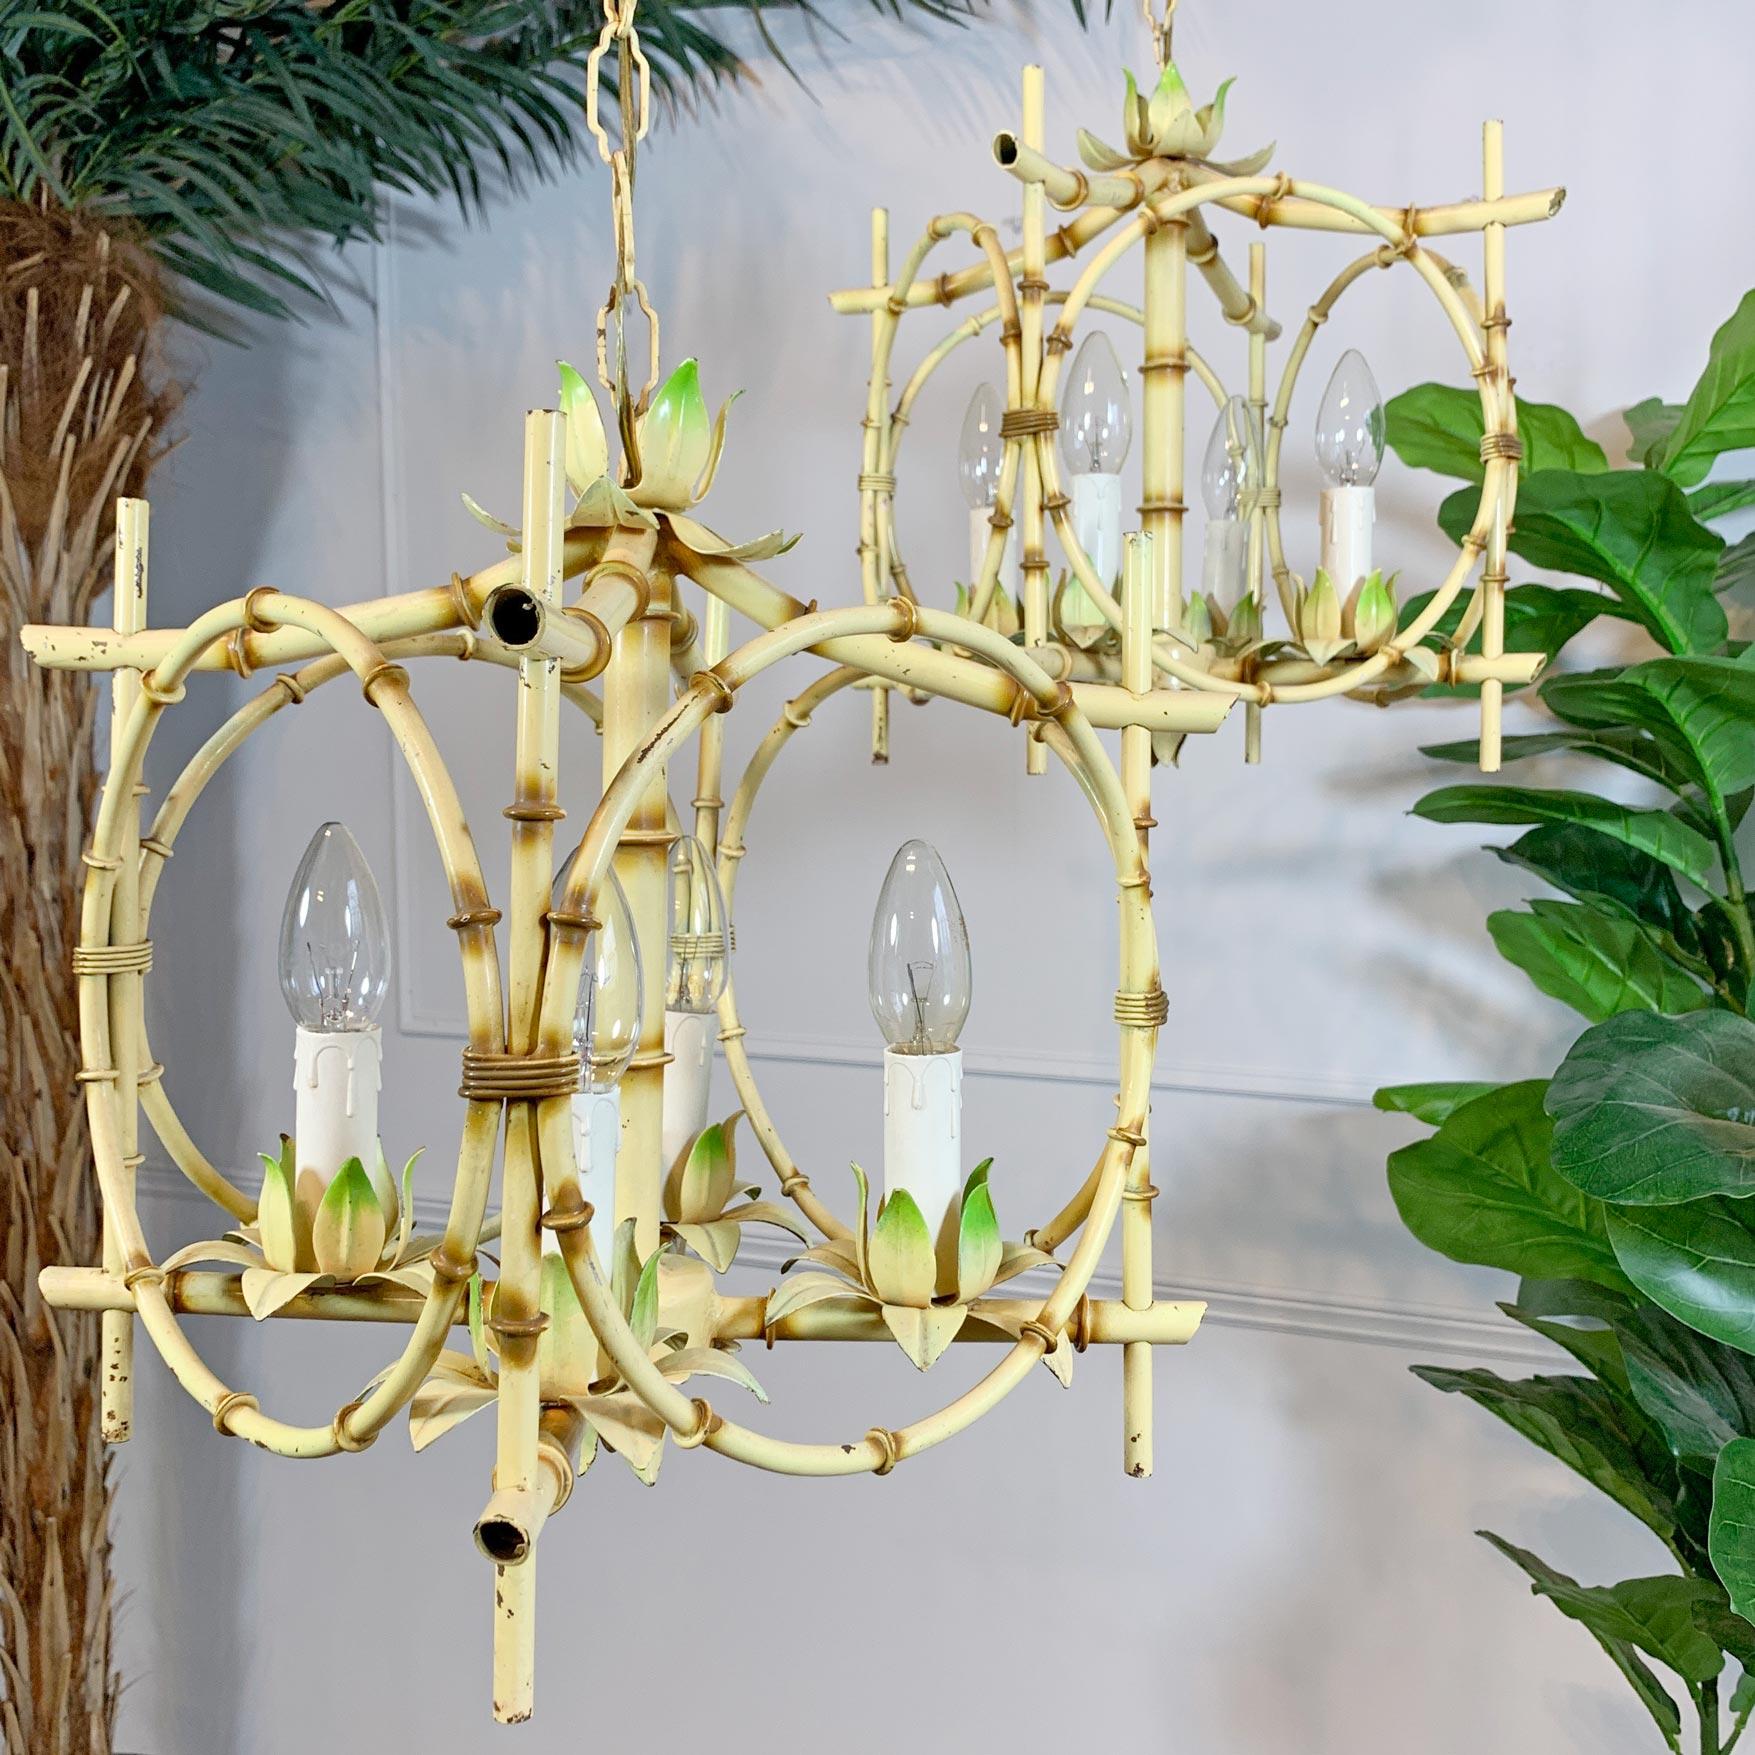 Pair of Faux Bamboo Pagoda Chandeliers Italy 1950's For Sale 7